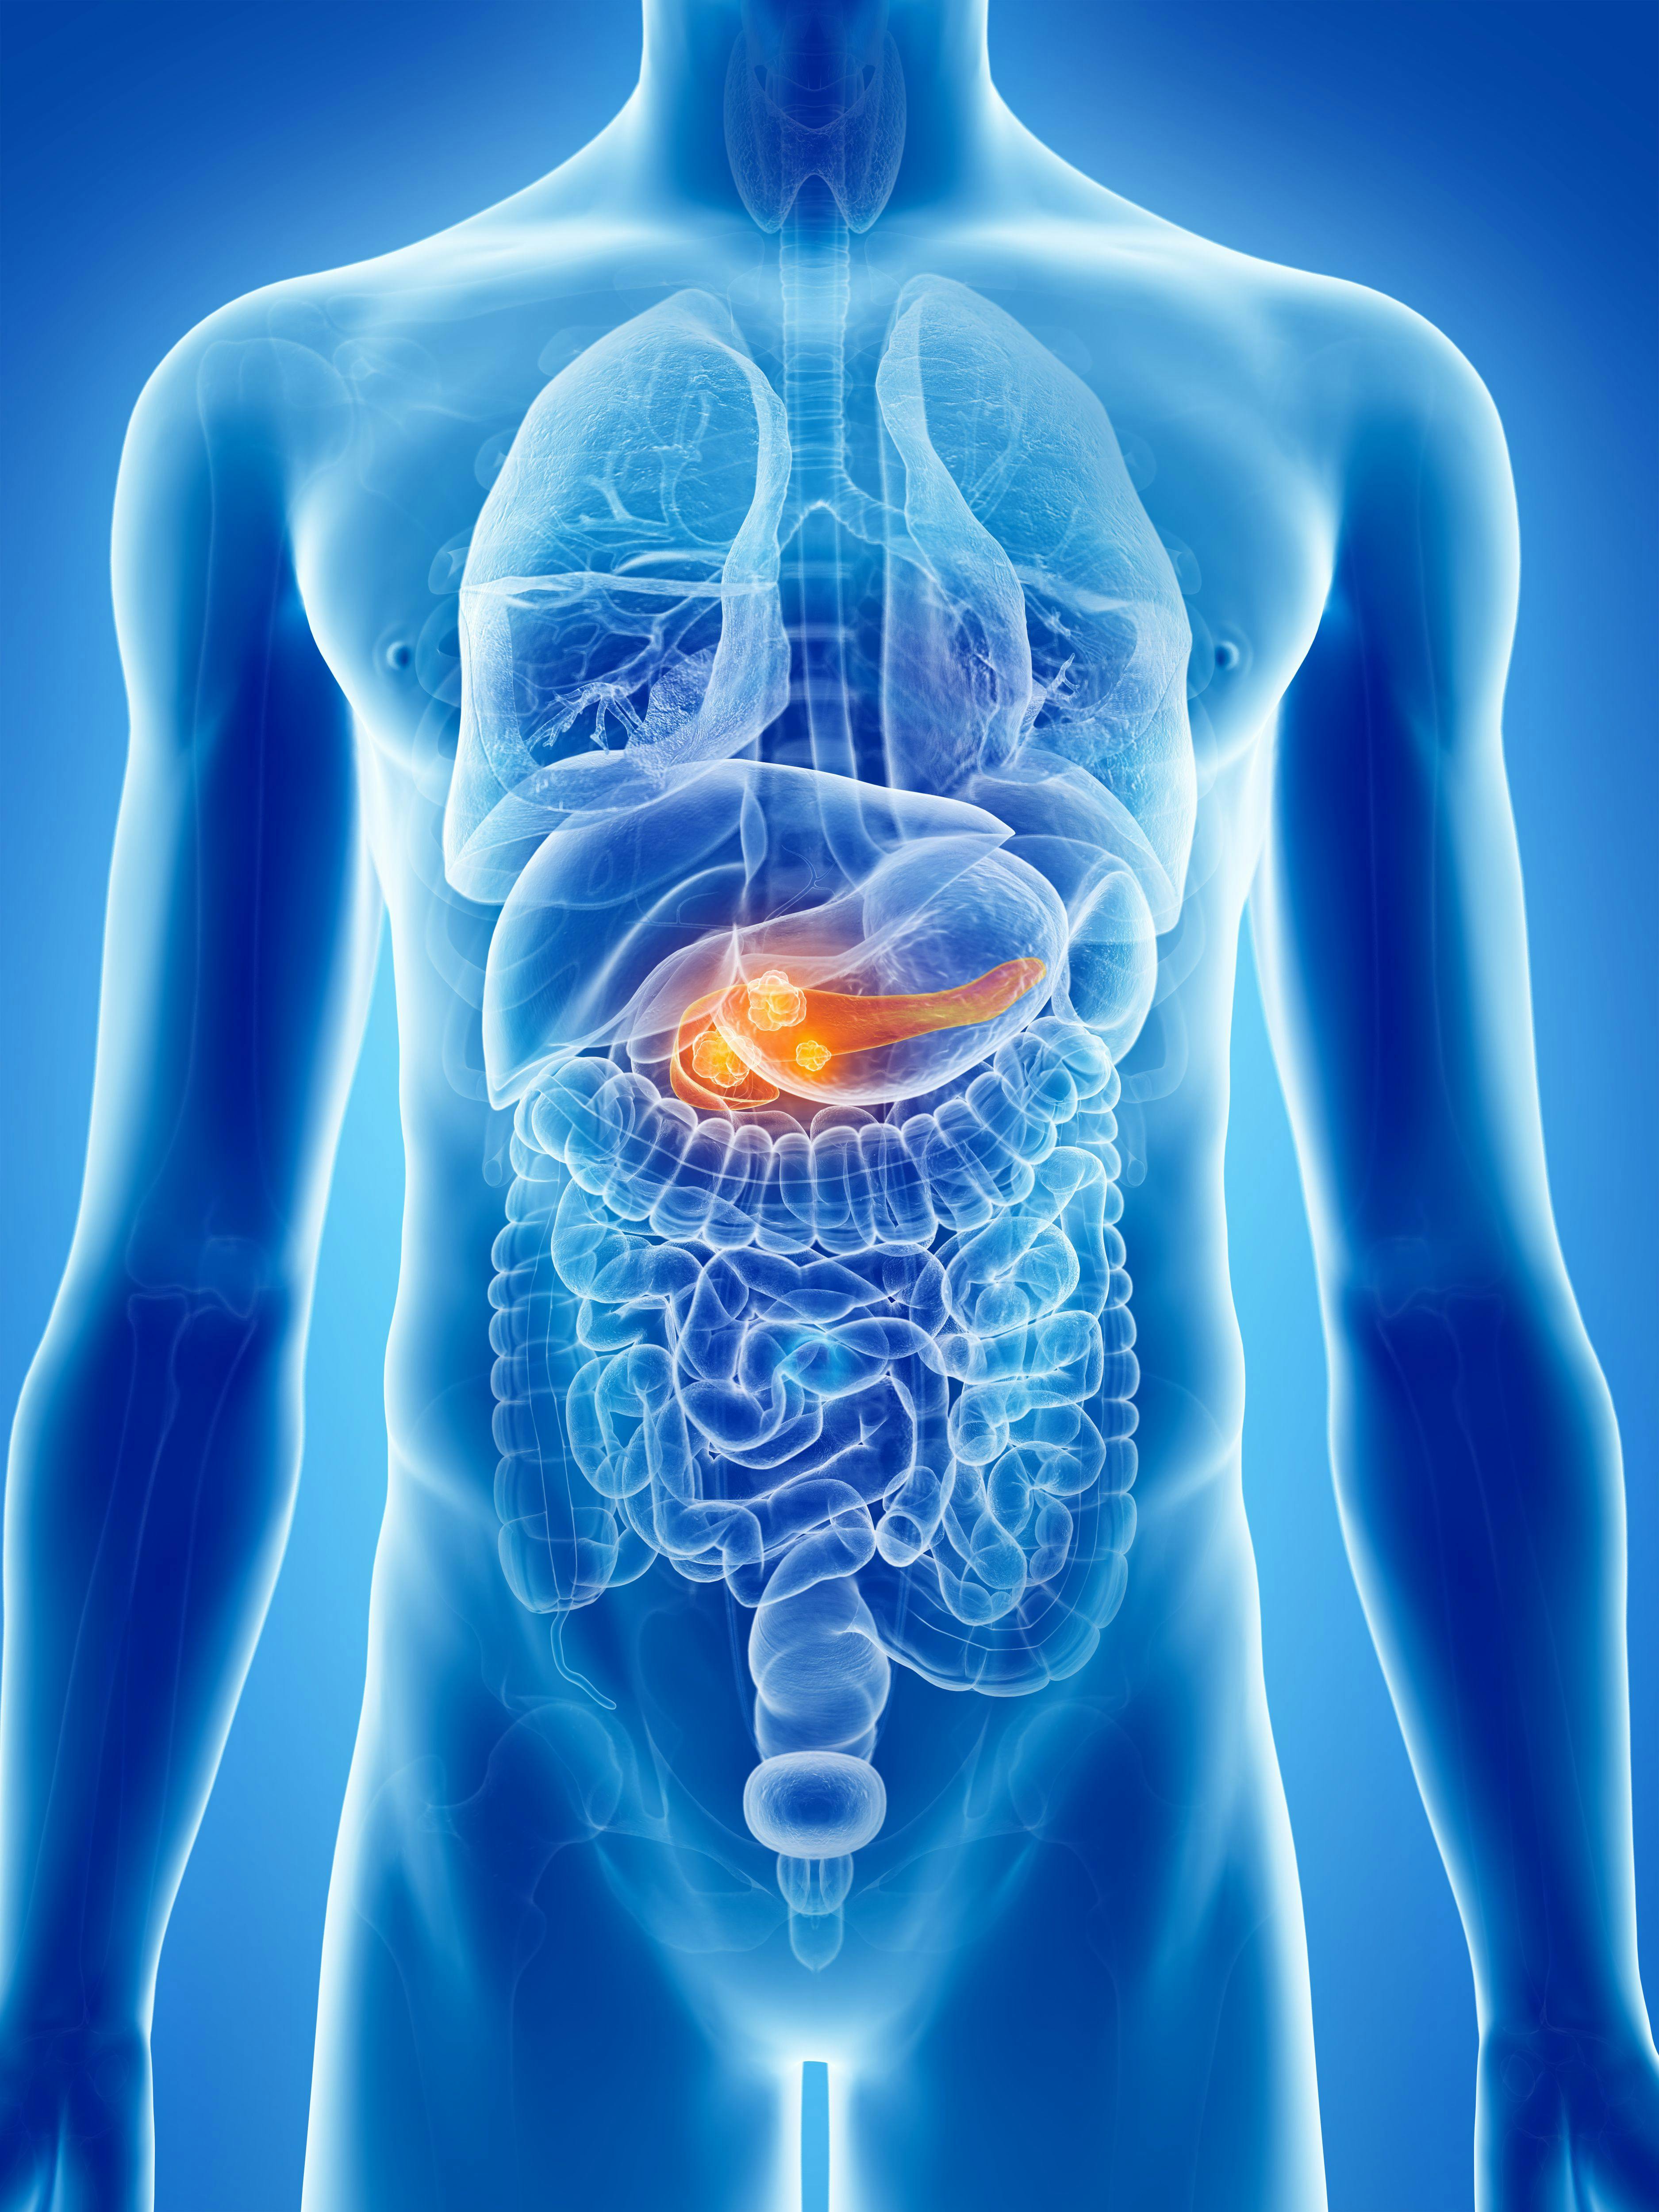 Efficacy and Safety of FOLFIRI for Previously Treated Advanced Pancreatic Cancer